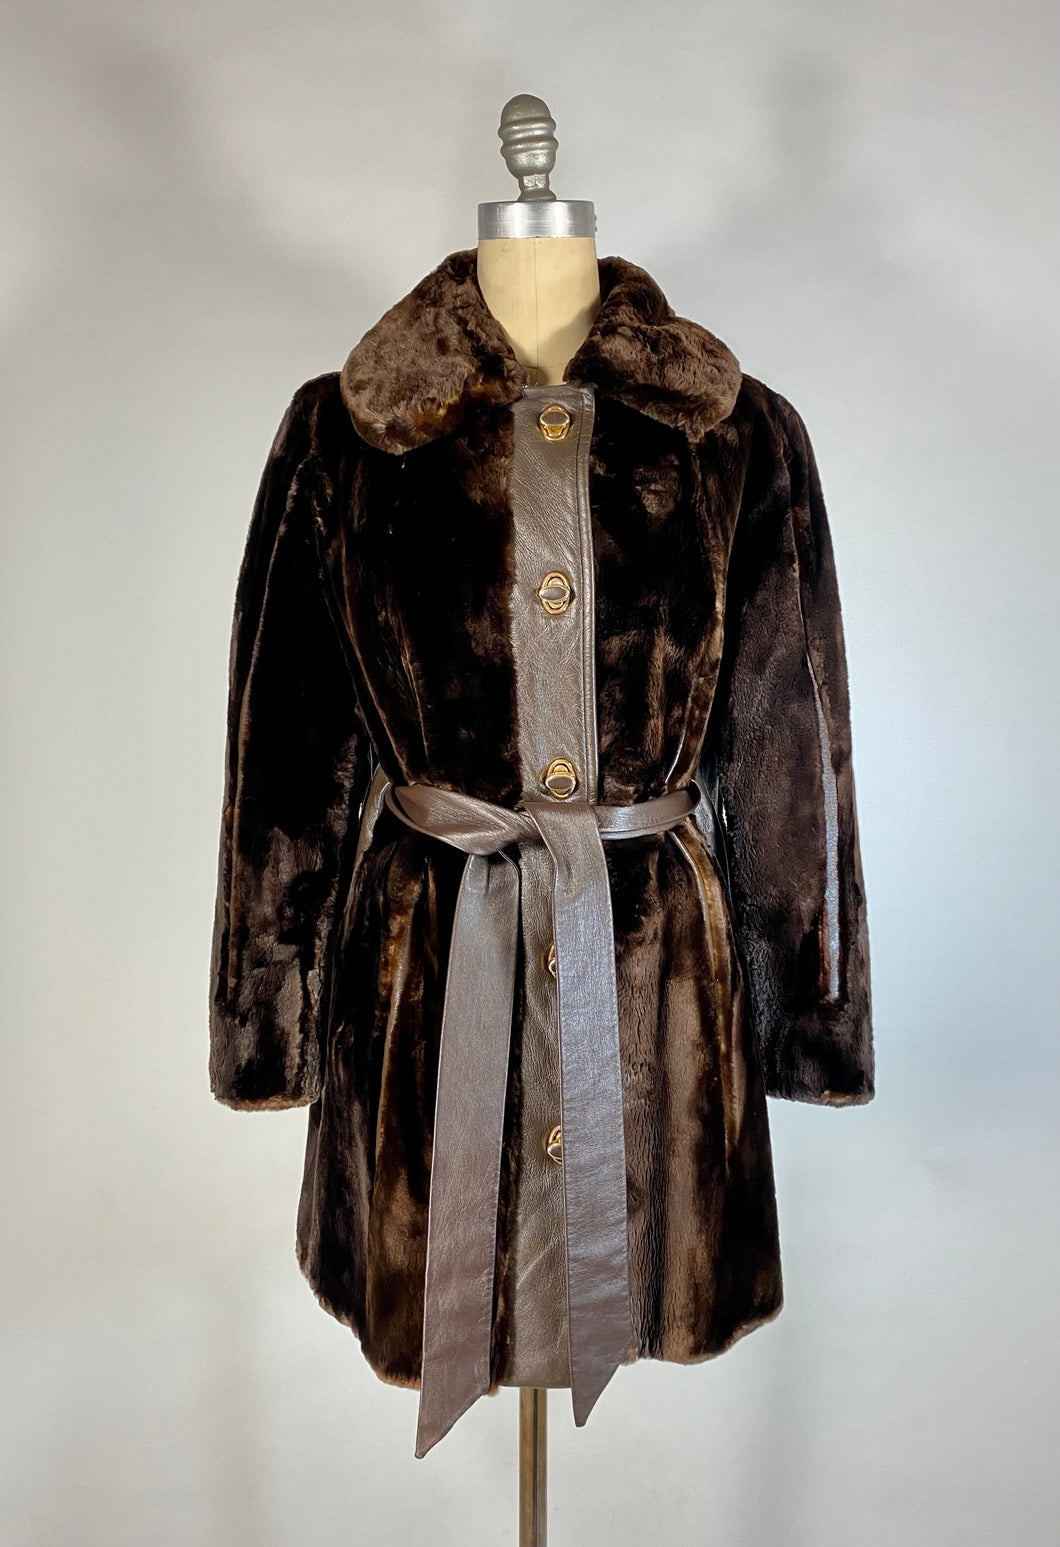 1970s dark brown sheared fur and leather pieced coat & belt by Ben-Ric